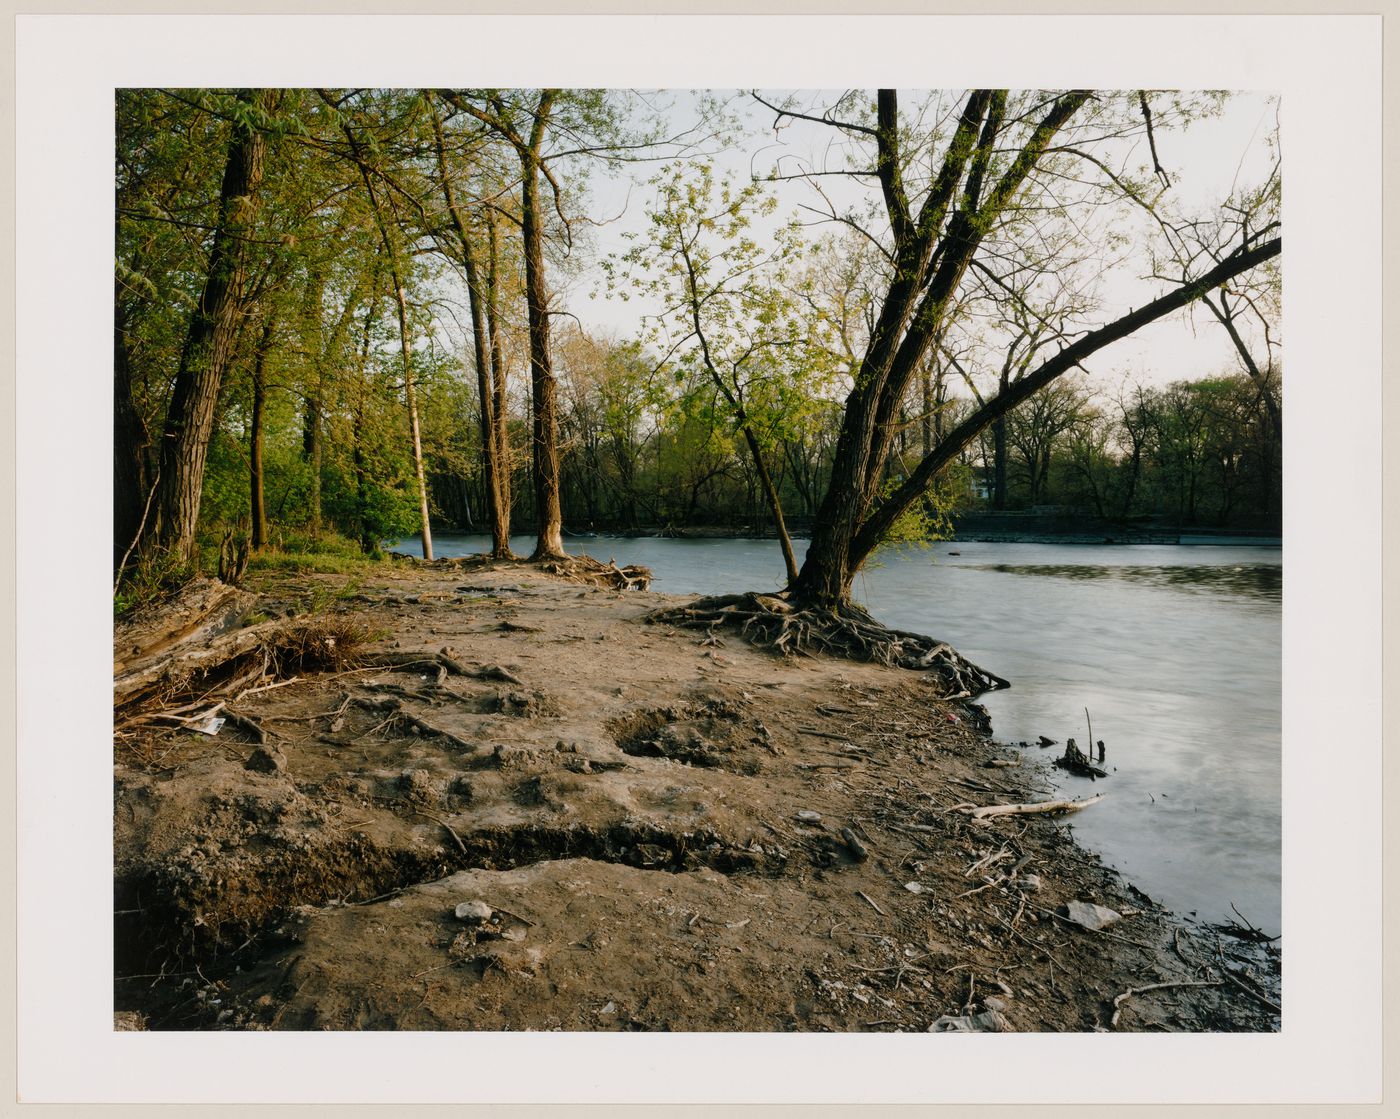 Viewing Olmsted: View of Desplaines River, Riverside, Illinois